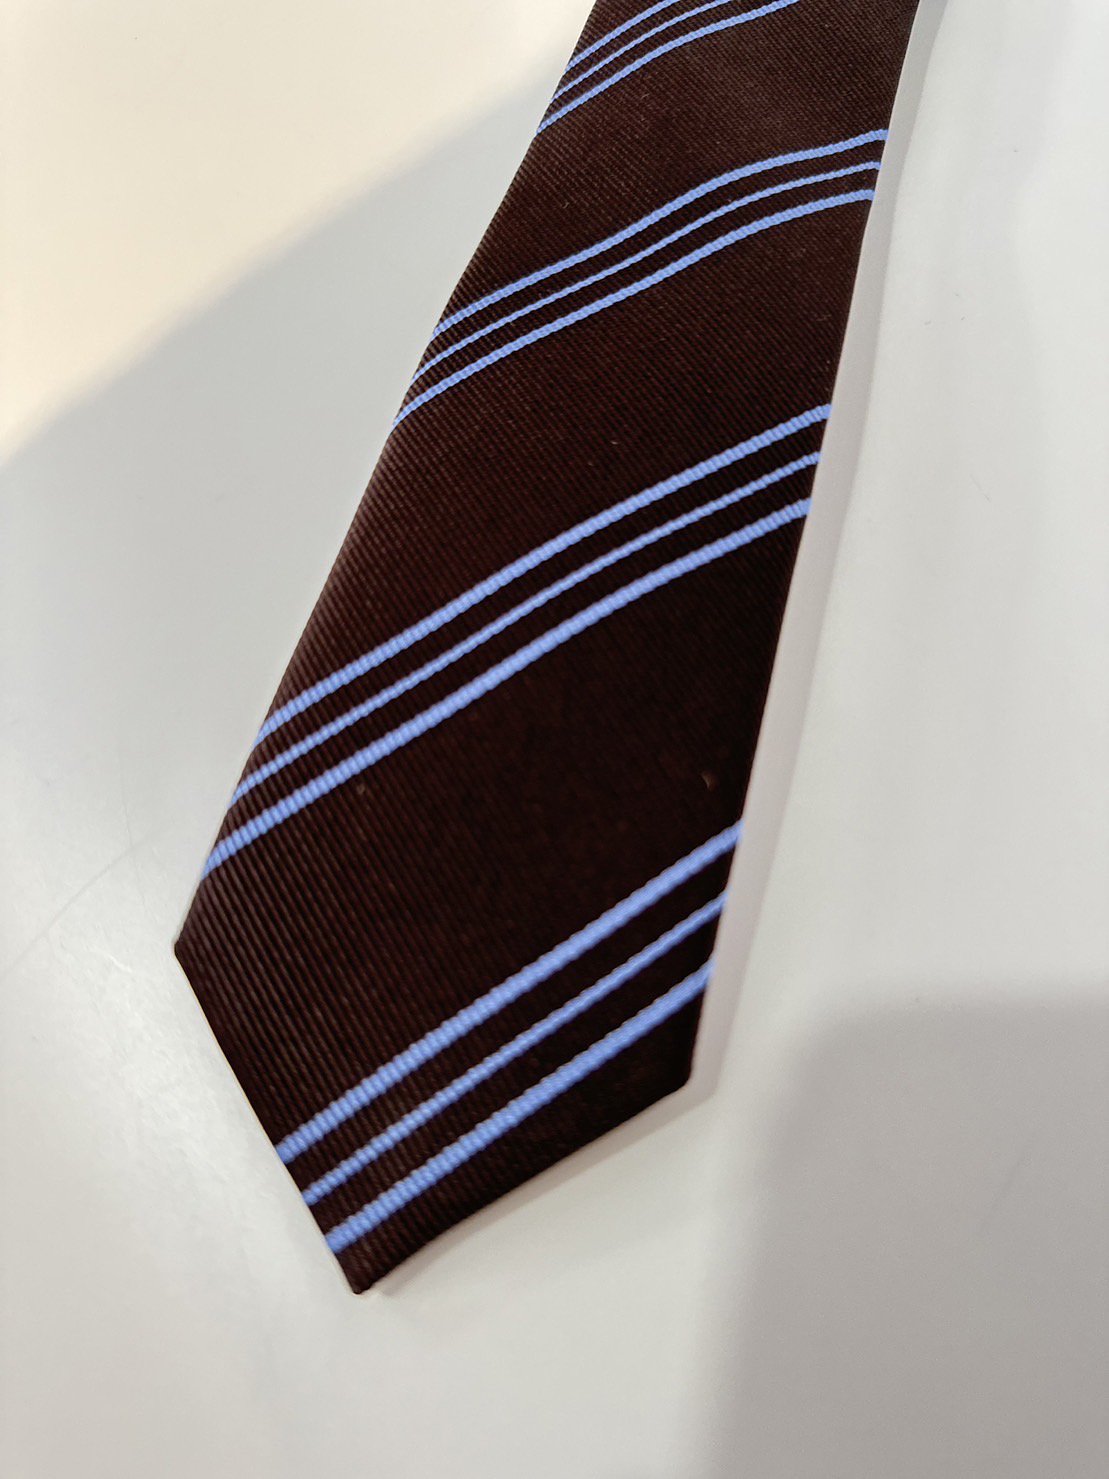 LITTLEBIG<br />Resimental Tie 2 / Brown&Blue<img class='new_mark_img2' src='https://img.shop-pro.jp/img/new/icons14.gif' style='border:none;display:inline;margin:0px;padding:0px;width:auto;' />